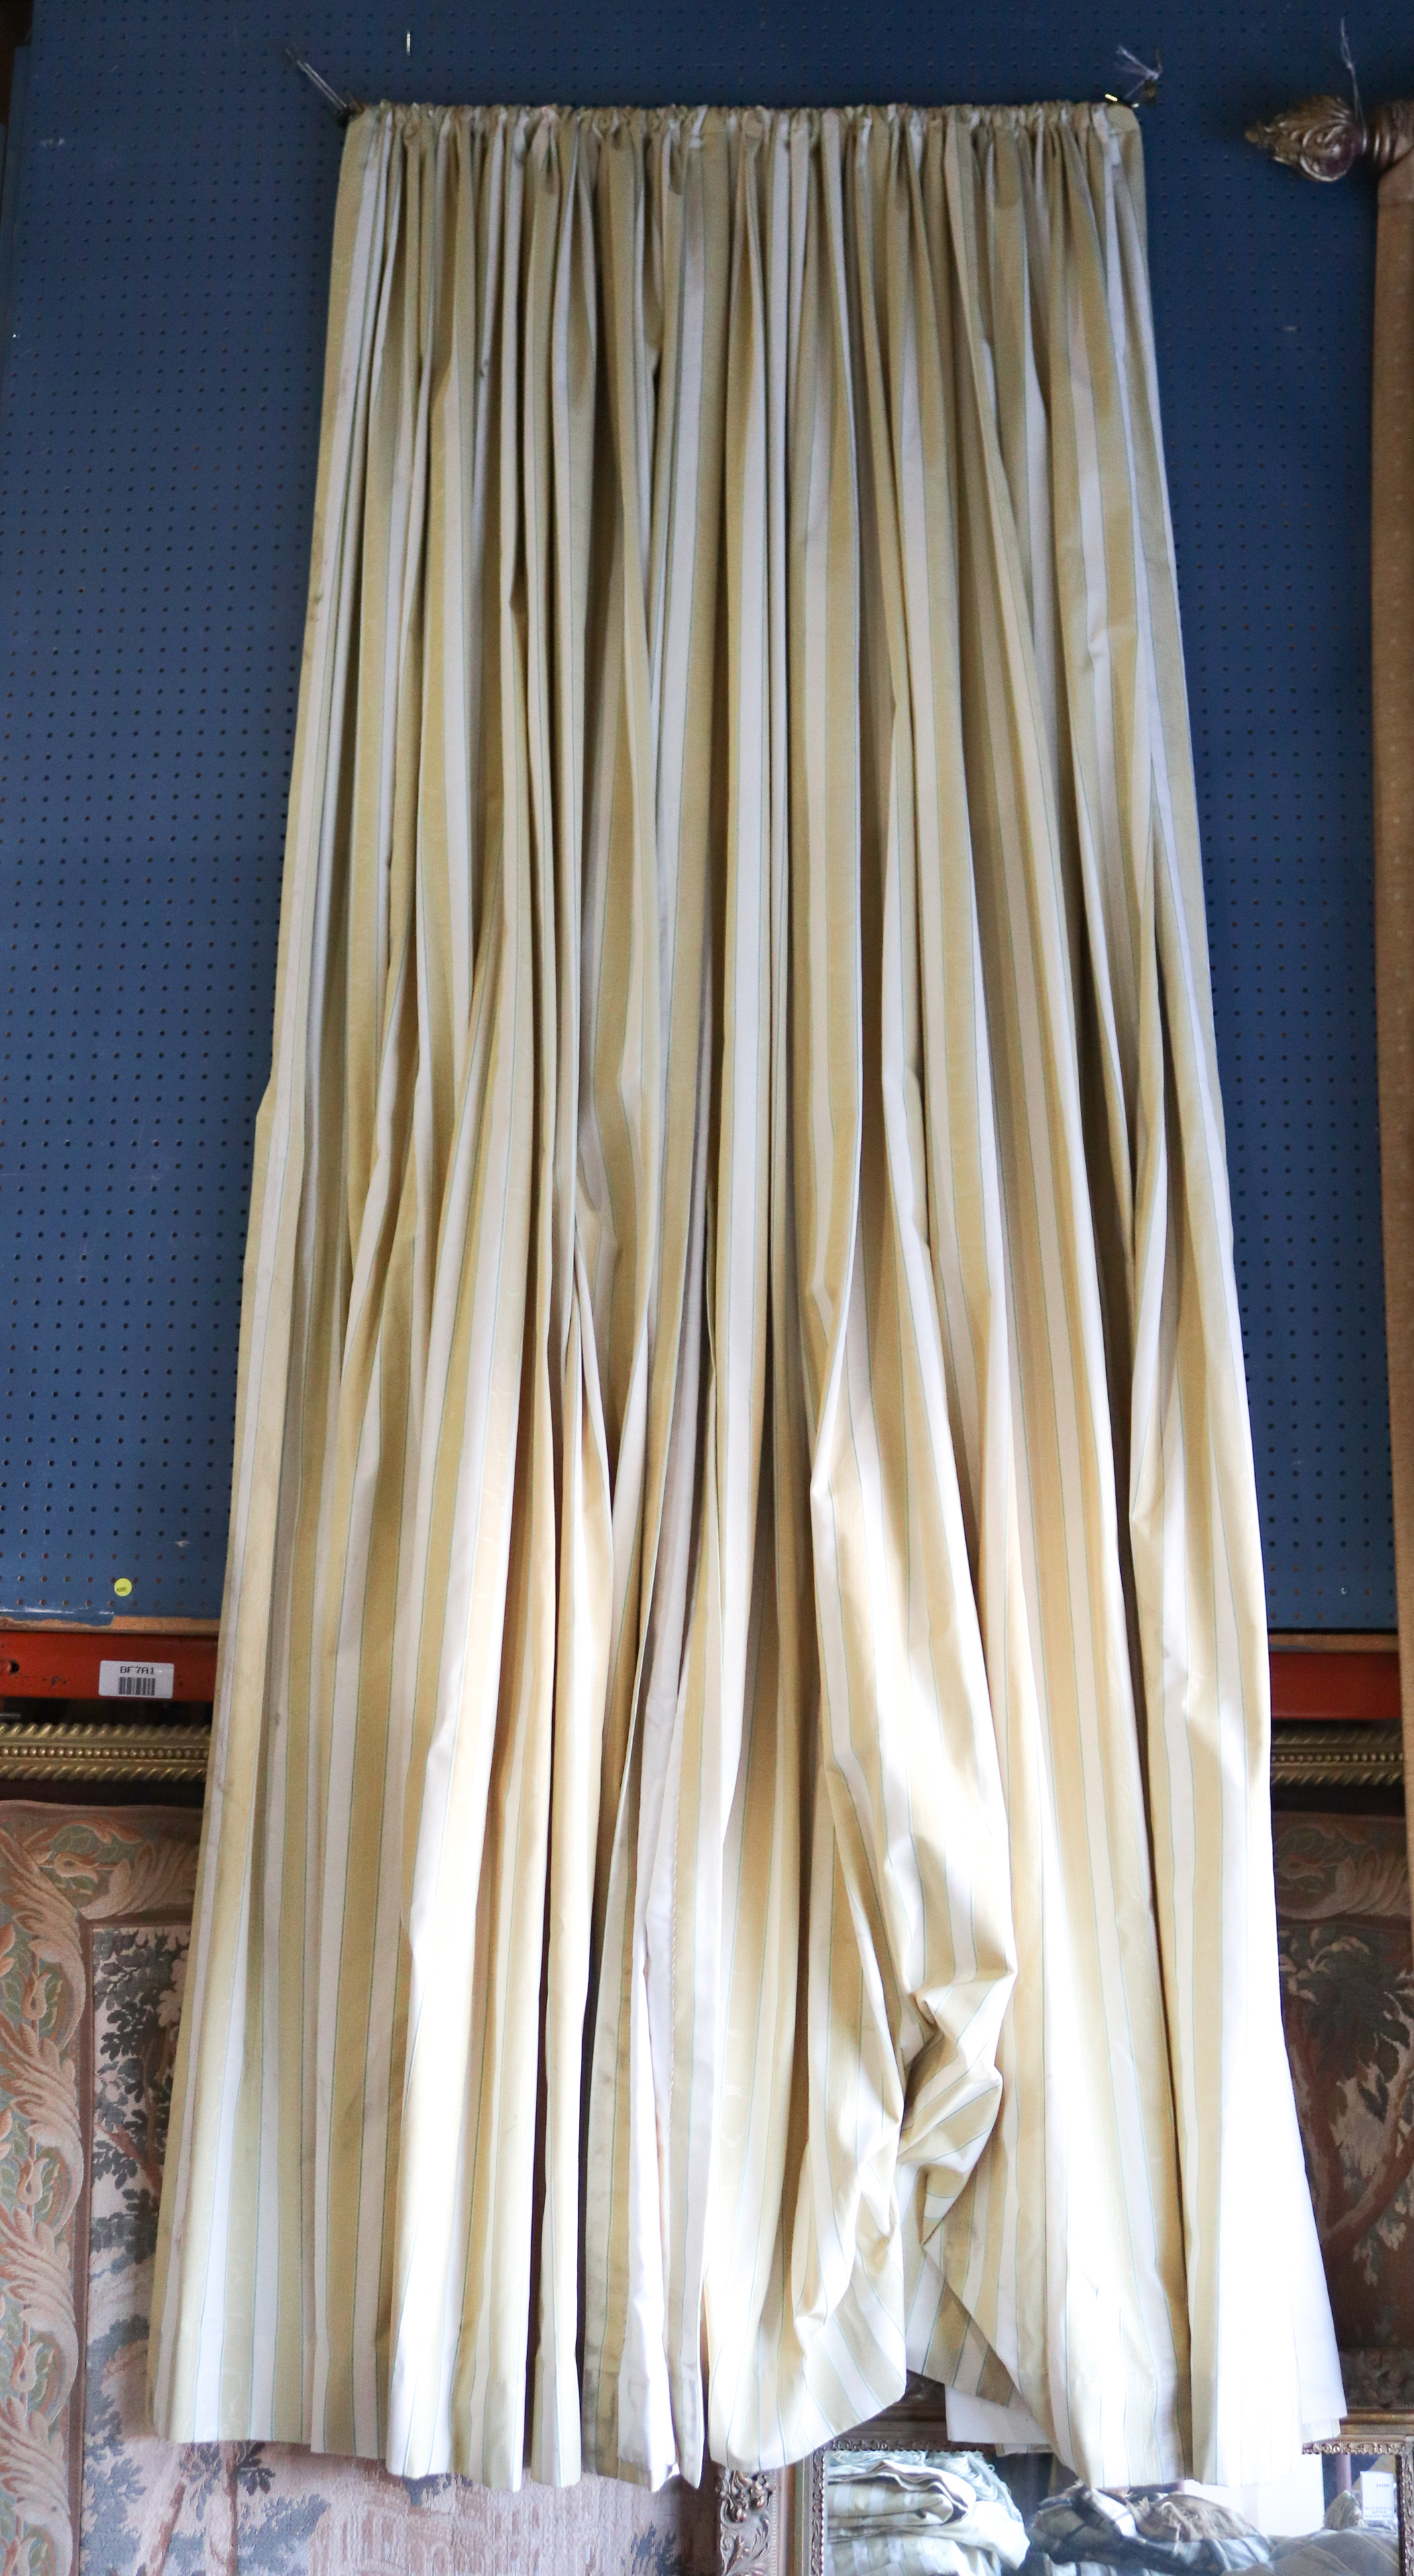 A set of drapes in striped upholstery, and tie-backs with tassels and additional hardware